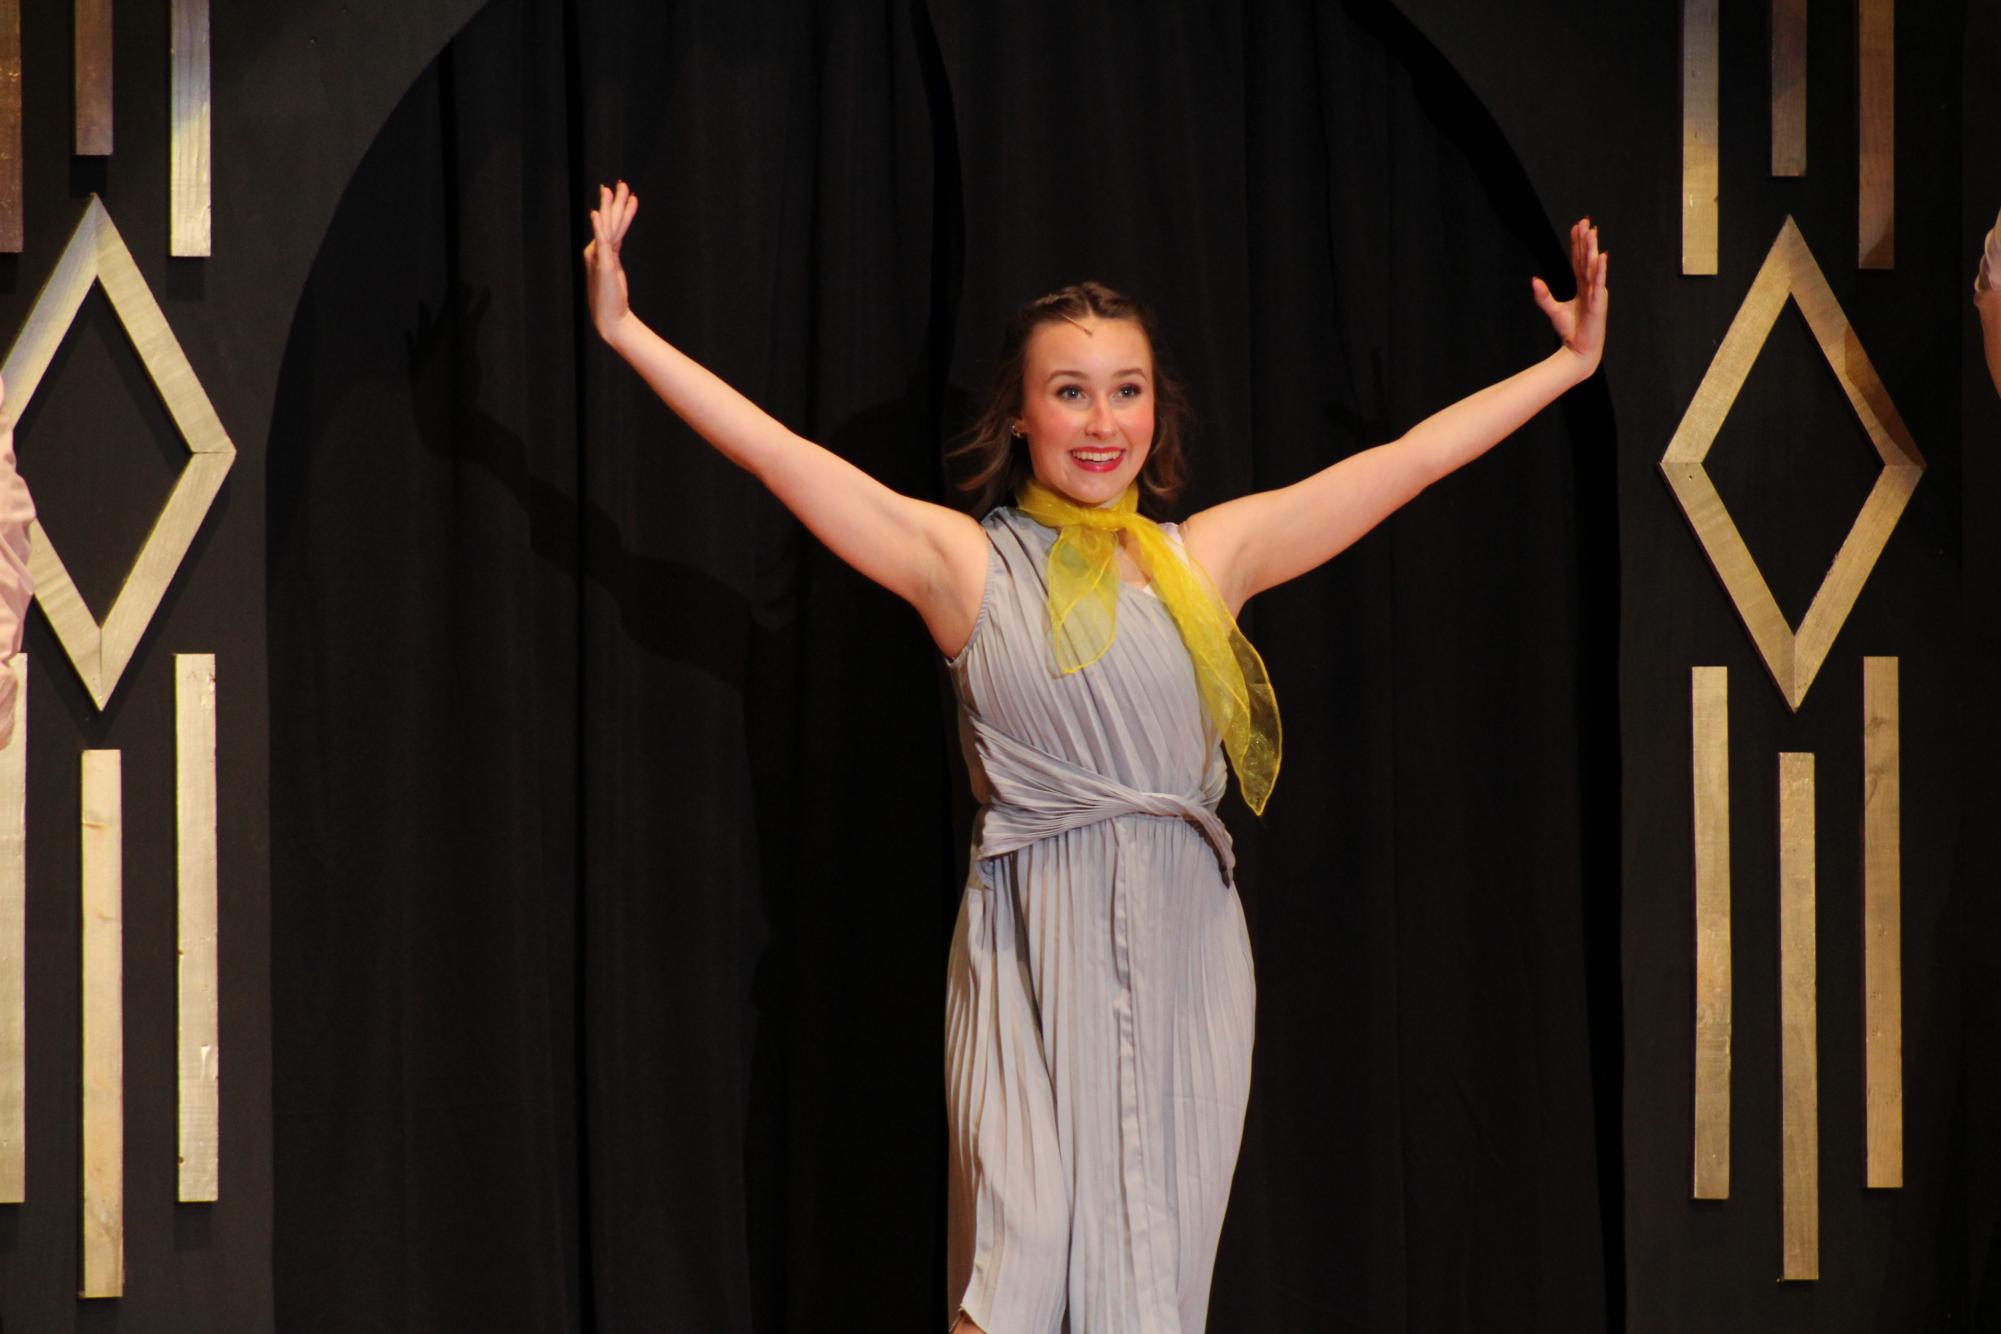 Lindquist preforms as Peggy Sawyer during the first act of 42nd Street. The musical premiered Nov. 10.